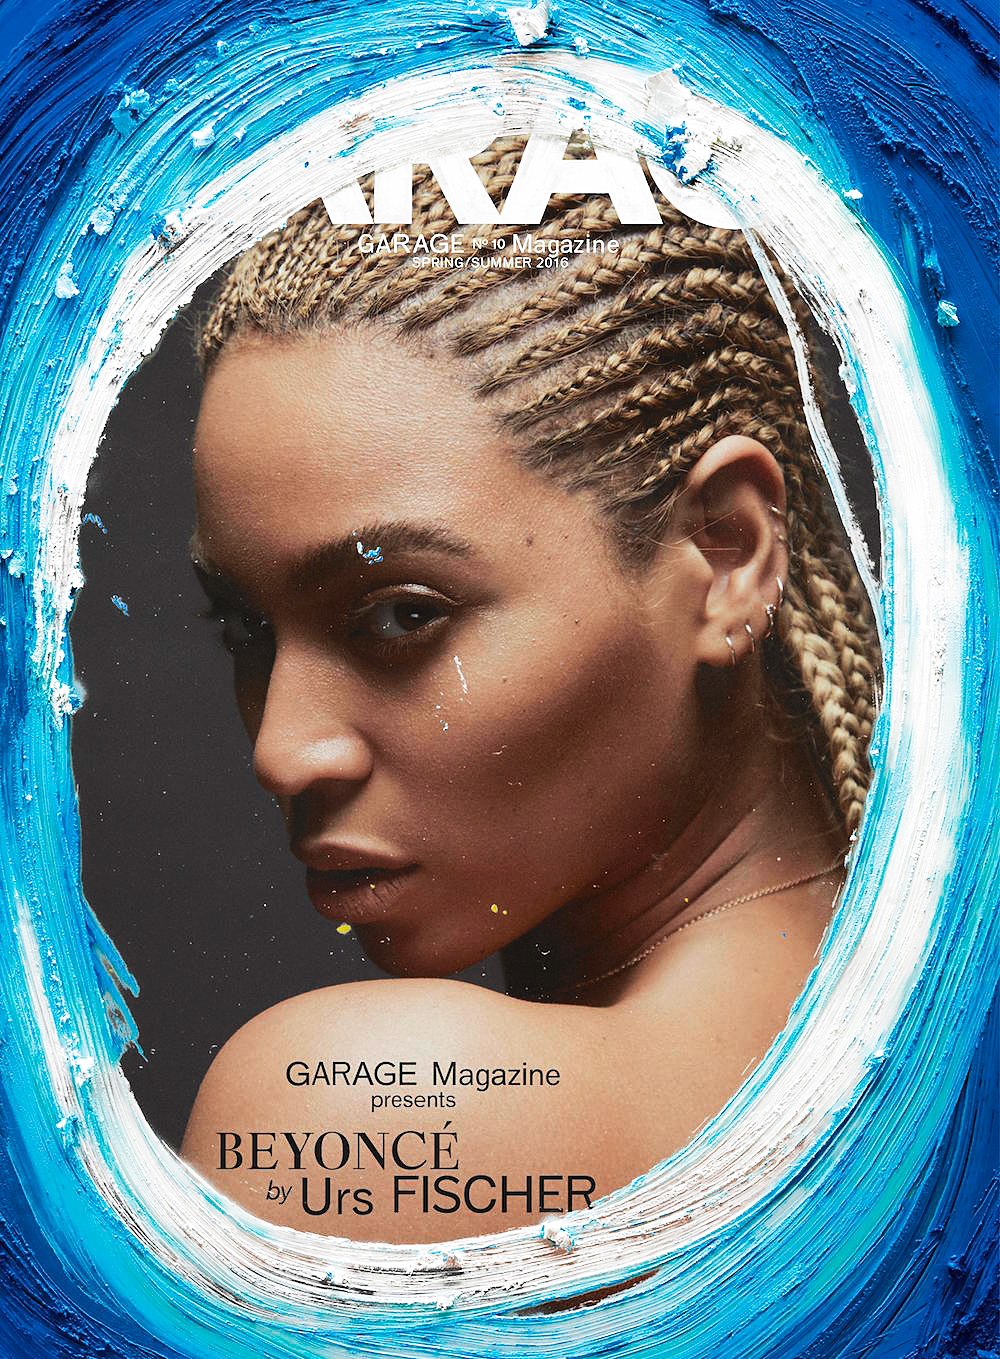 Beyonce on the cover of Garage Magazine